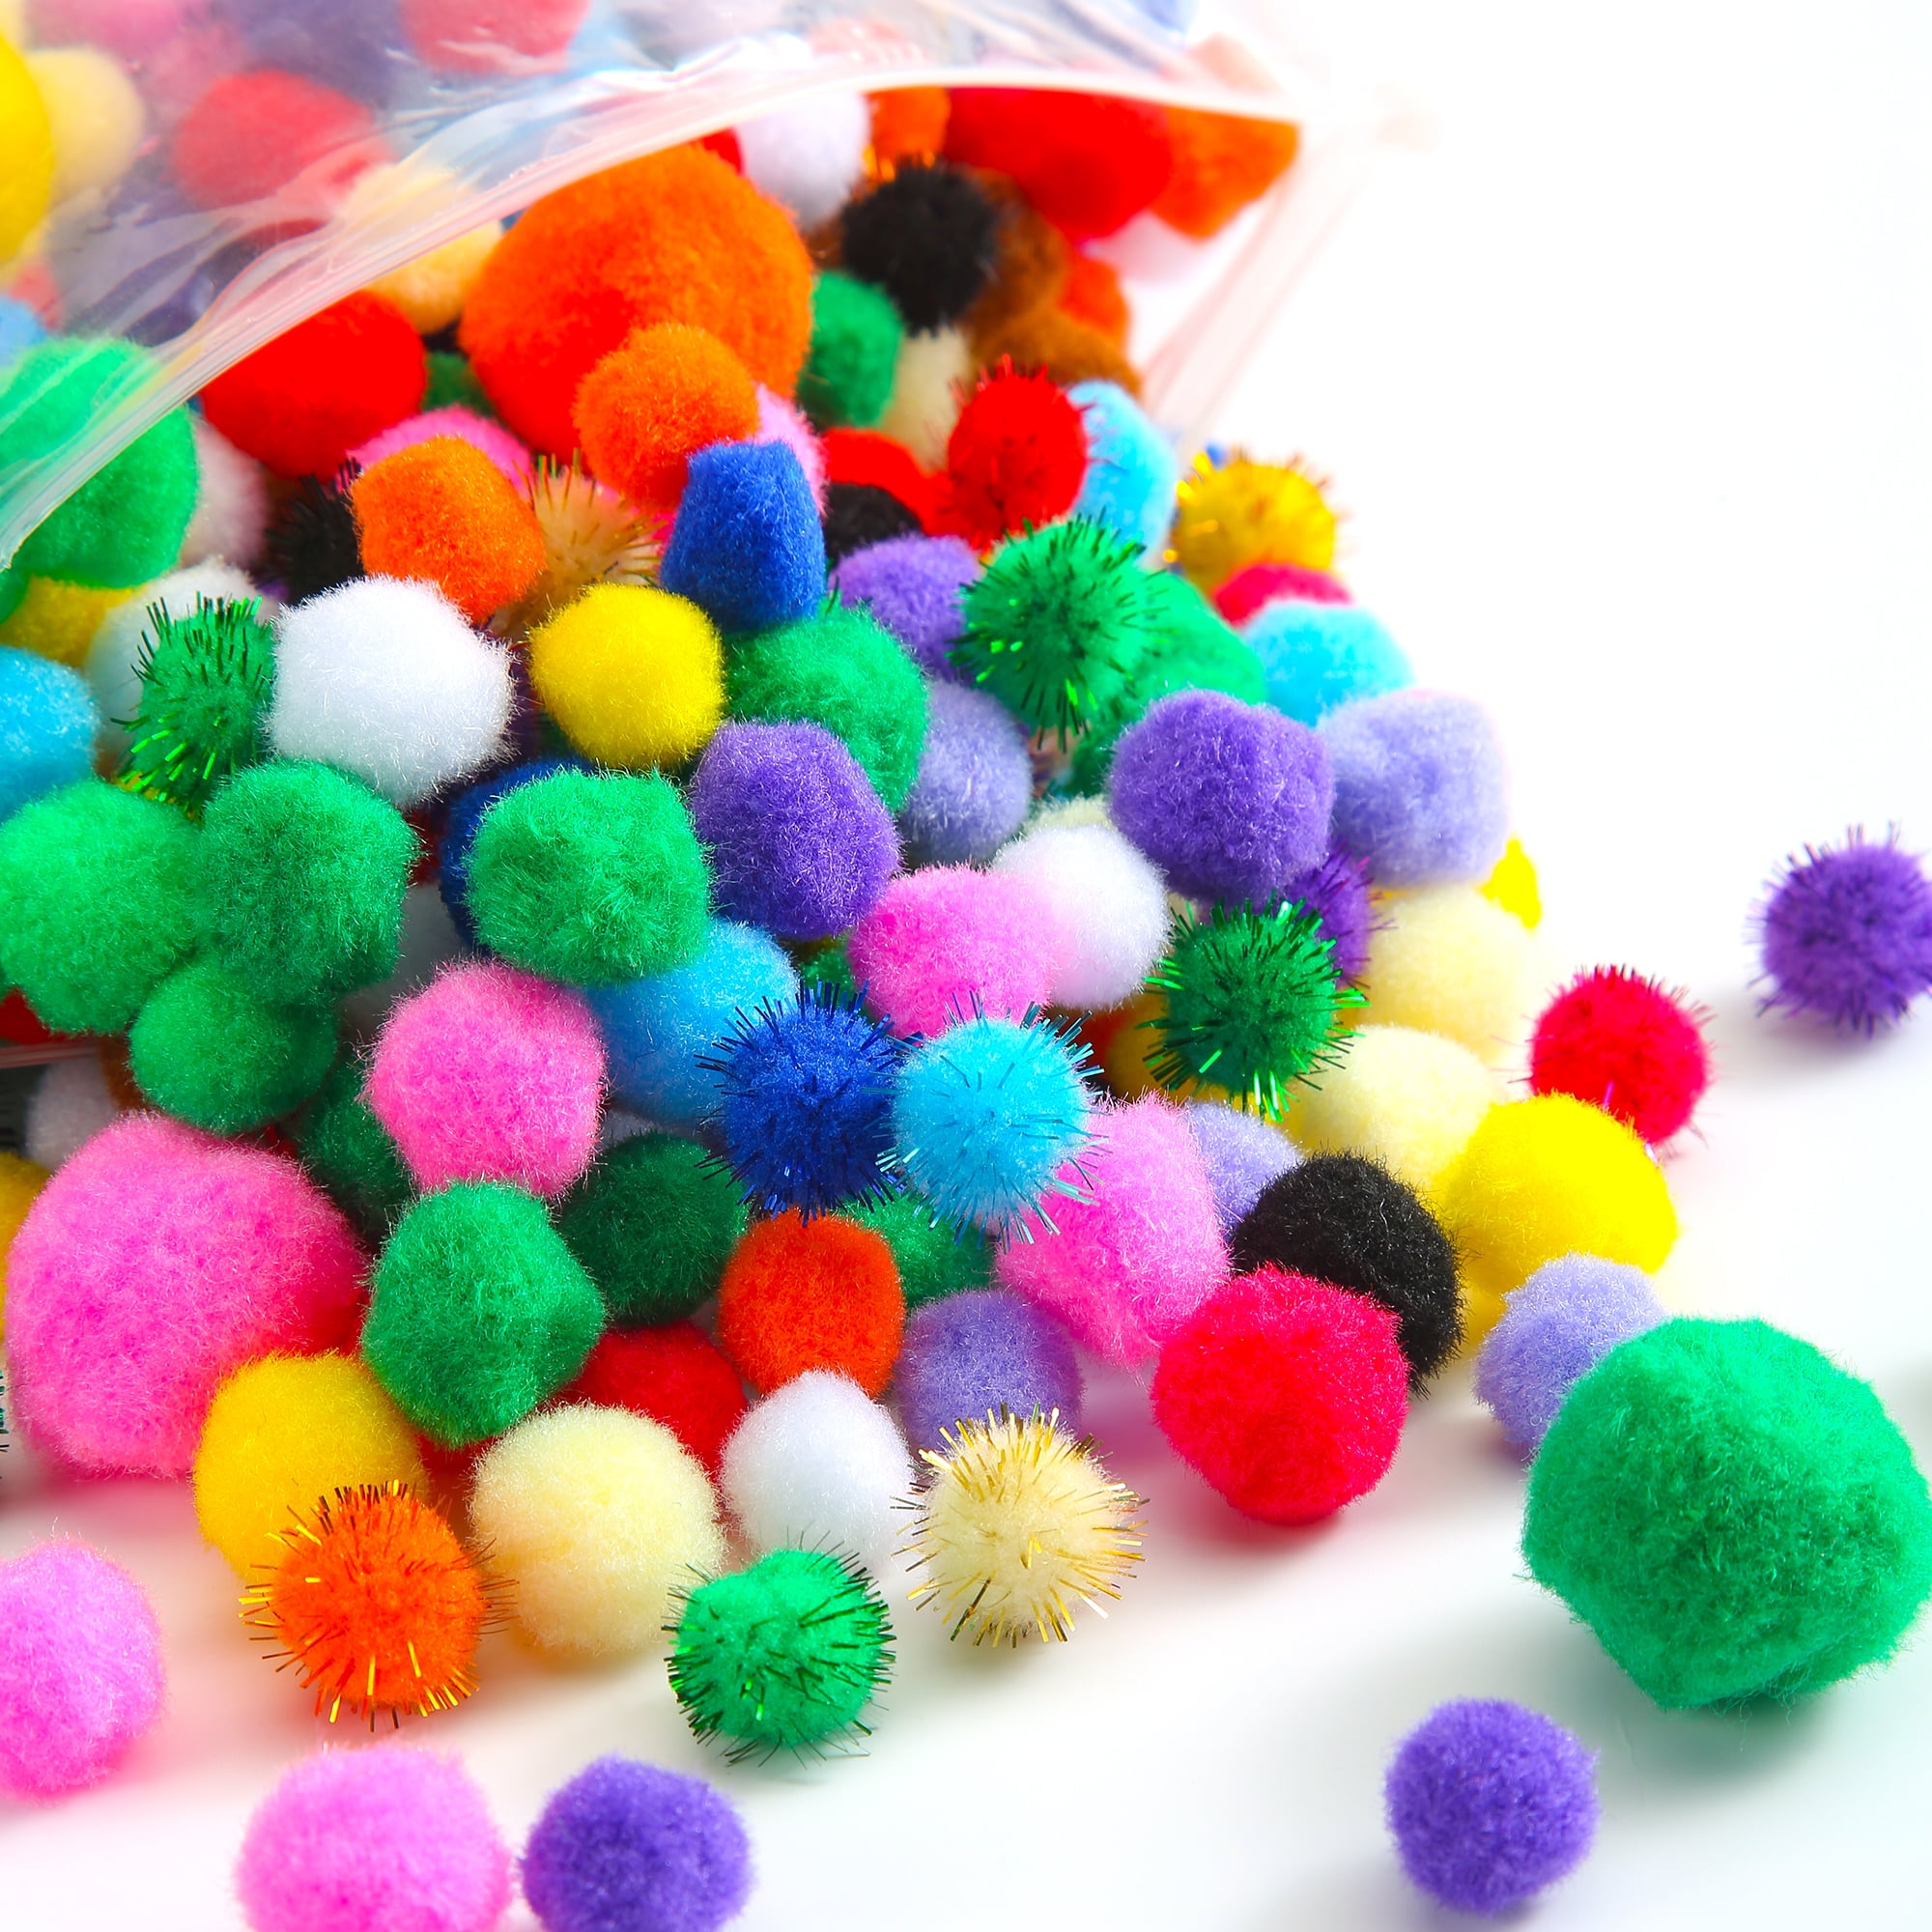 Adeweave 1000 Assorted Craft pom poms Multicolor Bulk pom poms Arts and Crafts  Pompoms for Crafts in Assorted Size- Soft and Fluffy Puff Balls Large  Colored Cotton Balls for Home and School